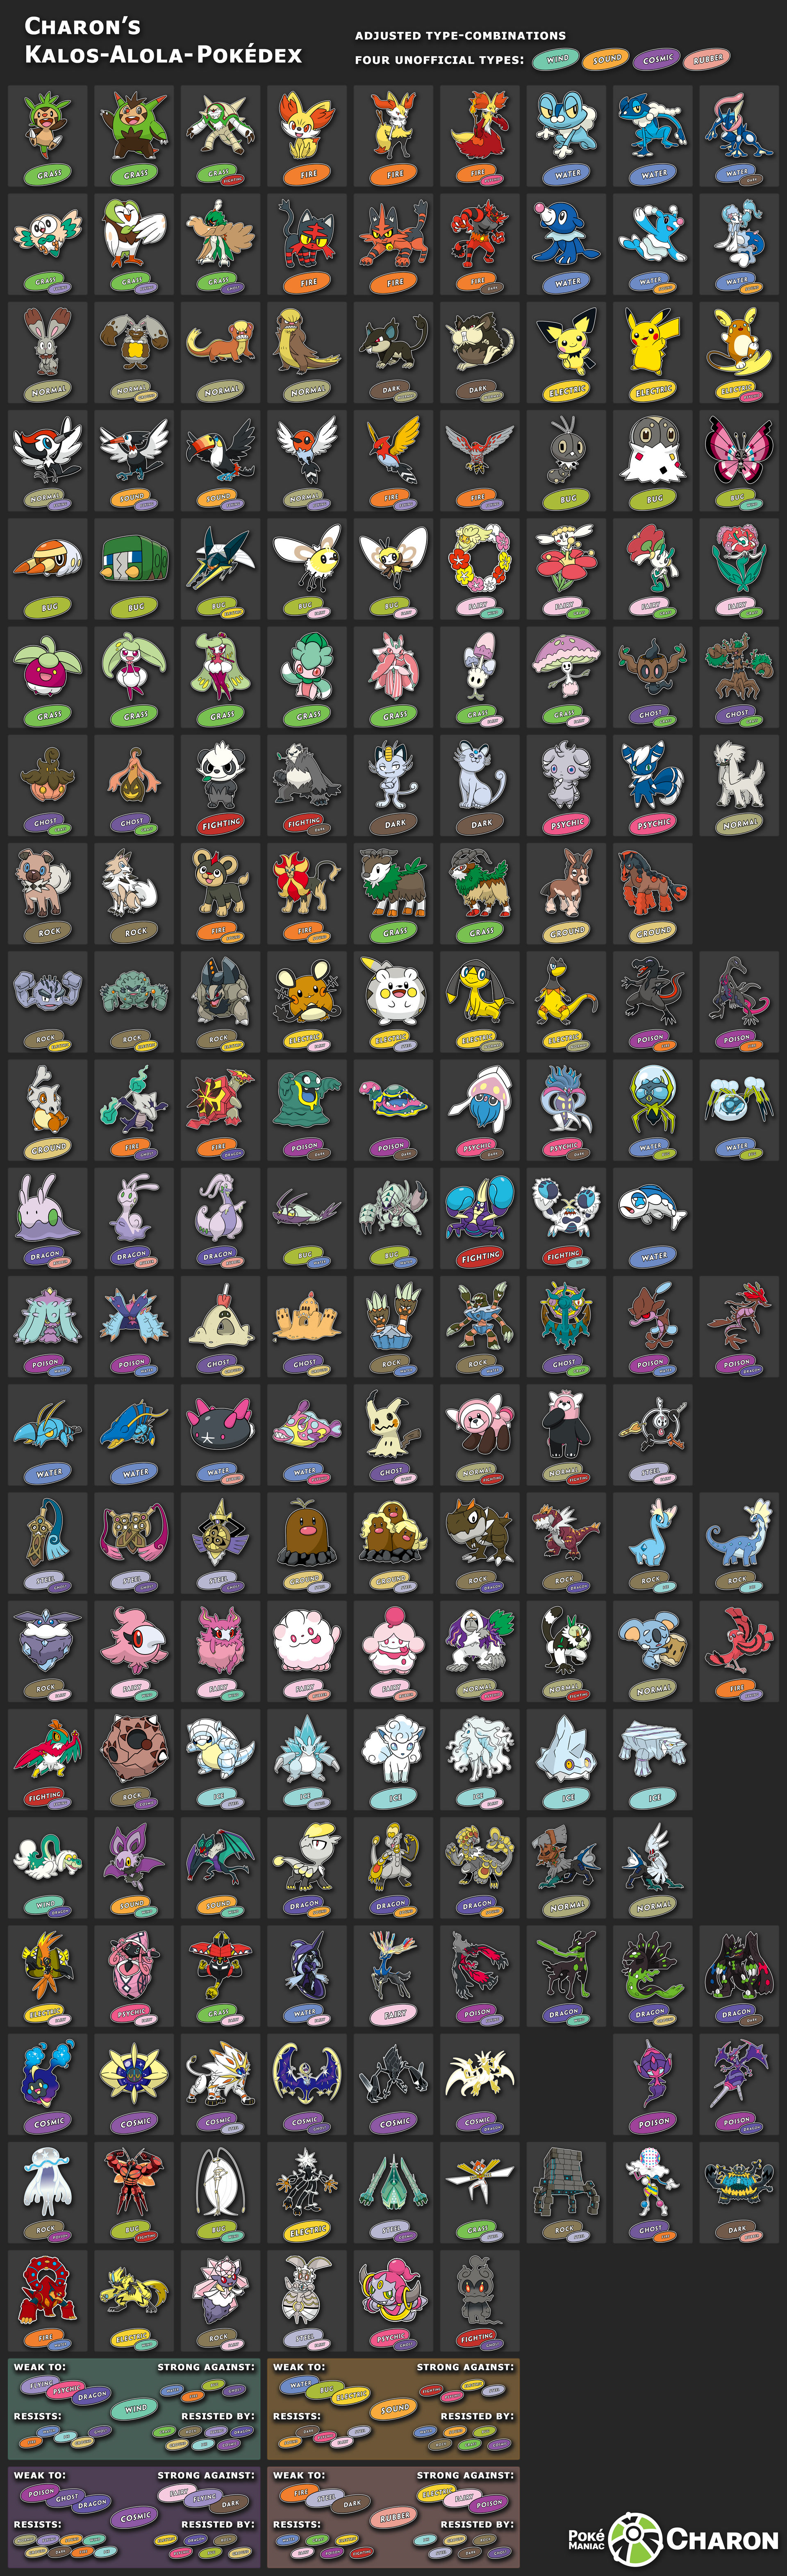 Pokedex With Alola forms & Megas For The Update - Suggestions